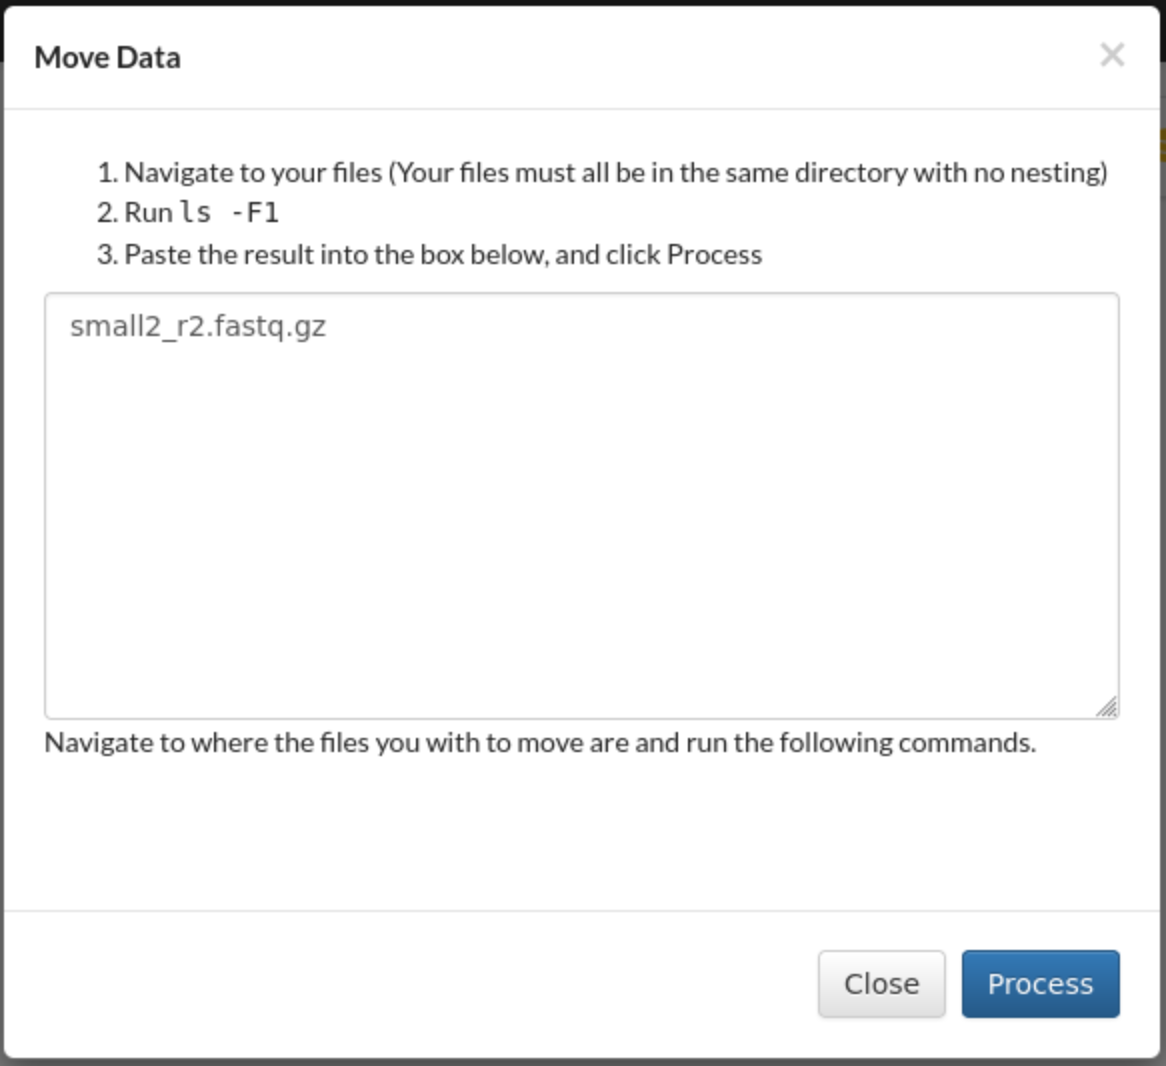 Move Data dialogue with details inputted